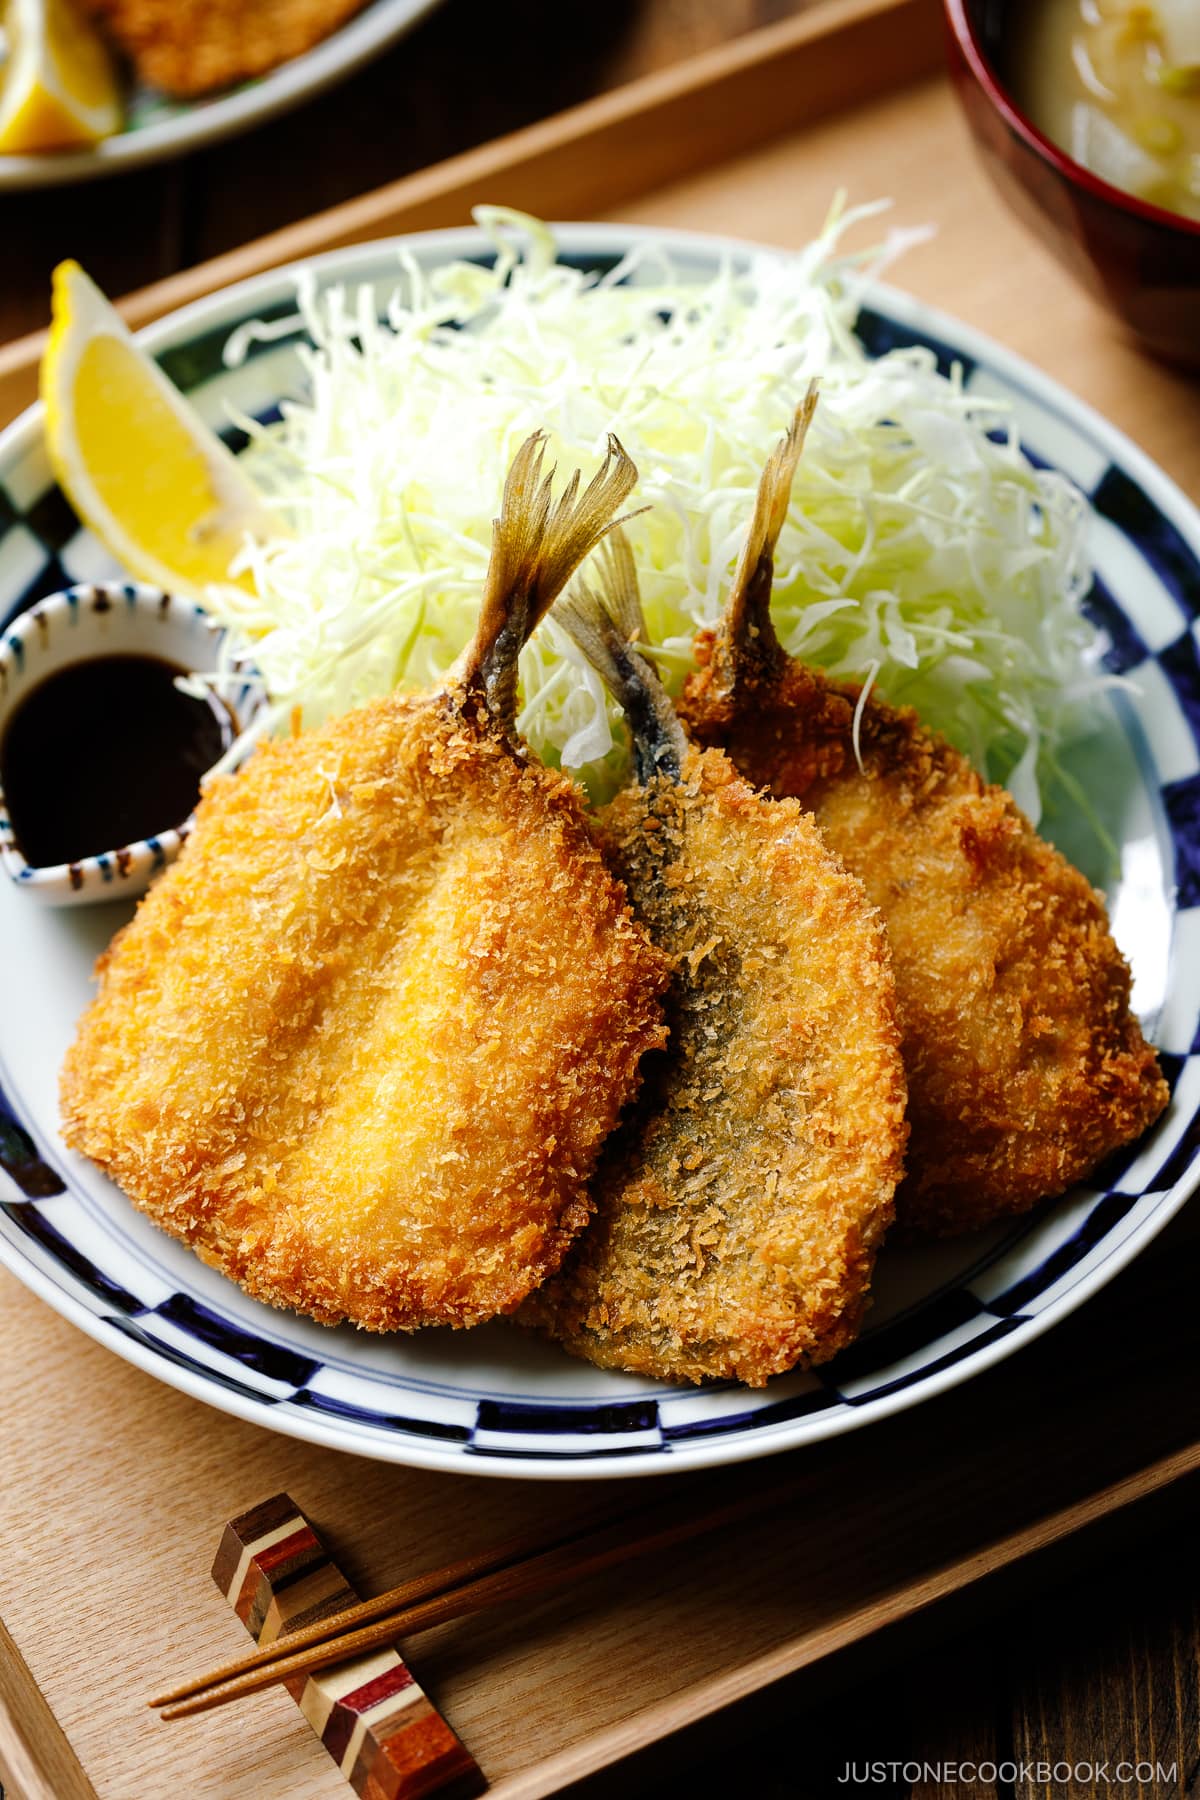 A plate containing panko-coated, fried horse mackerel fillets and a bed of shredded cabbage salad.